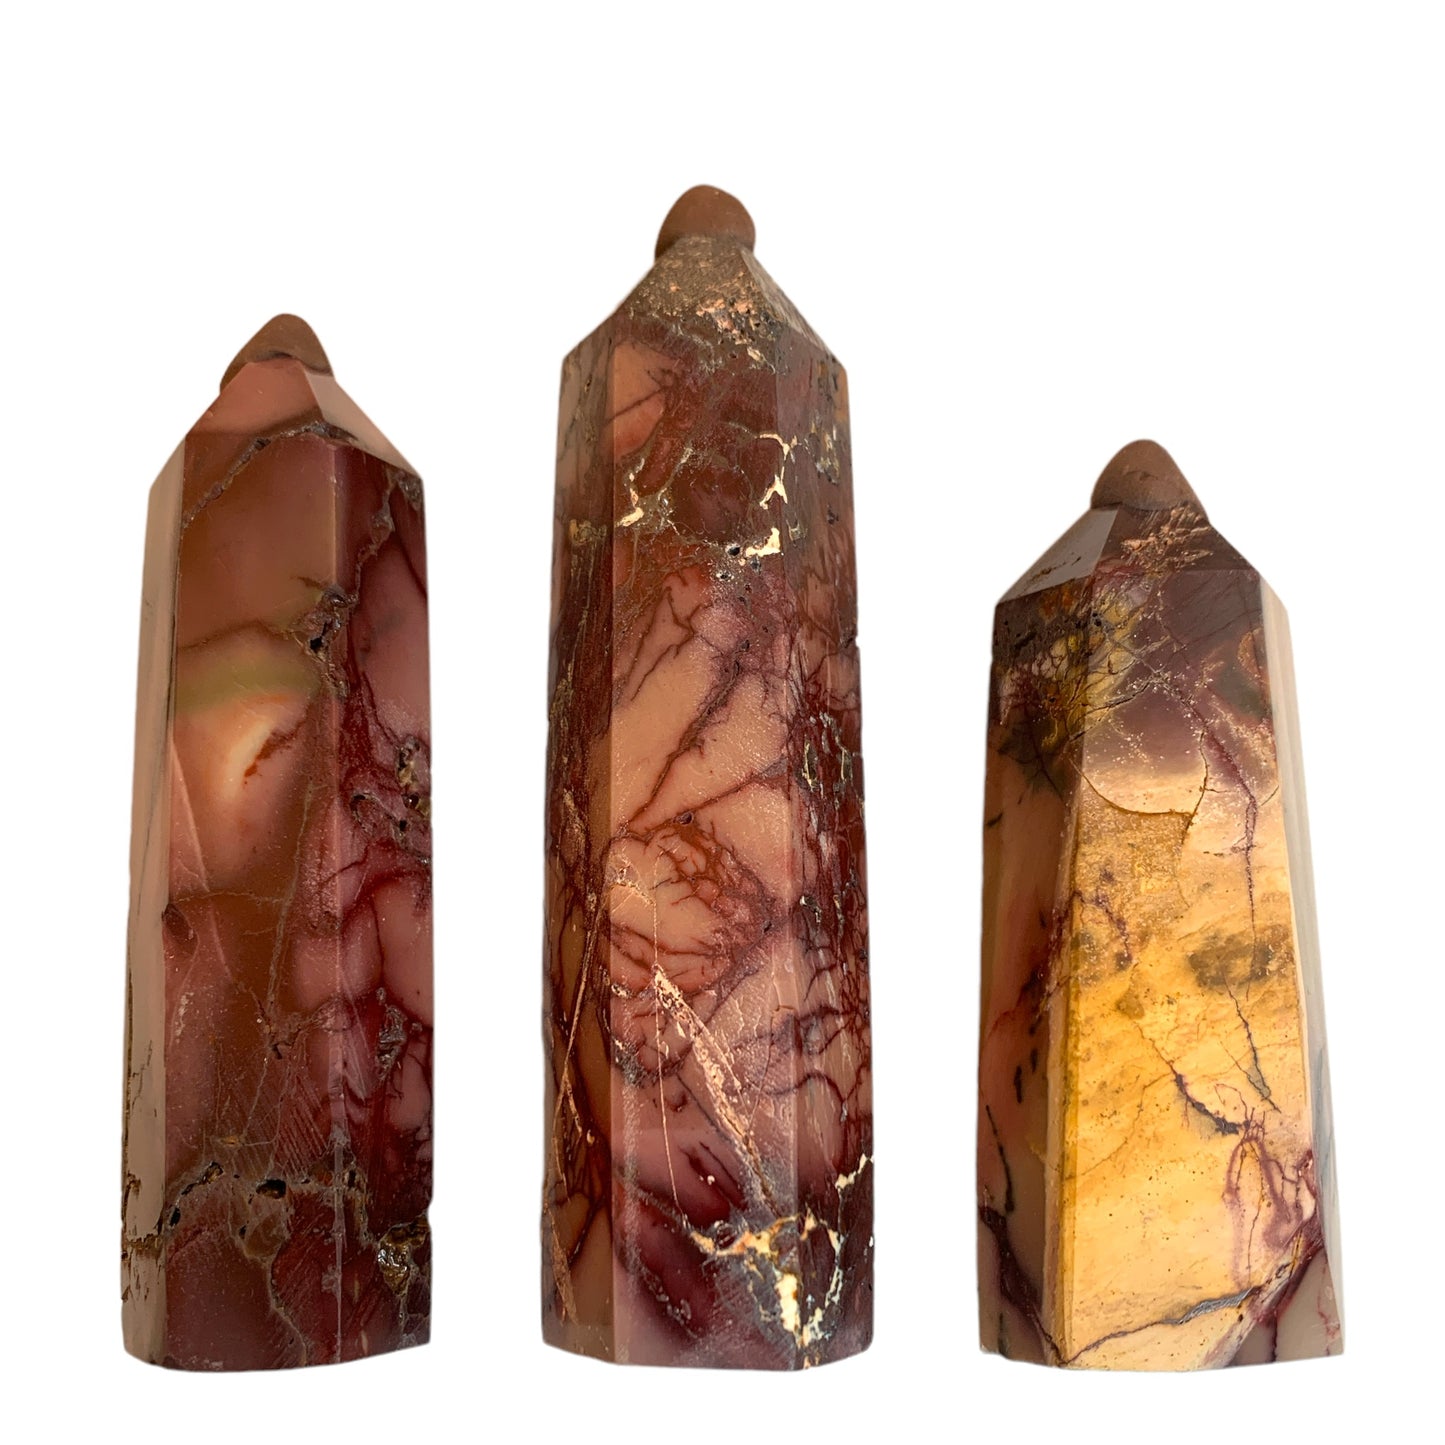 Mookite Polished Points - 3 - 5 inch - Price per gram per piece - B2B ordering 1 = 1 Point so we charge Ex. 100g = $15 each - NEW622 - Nurturing stone that supports and sustains during times of stress